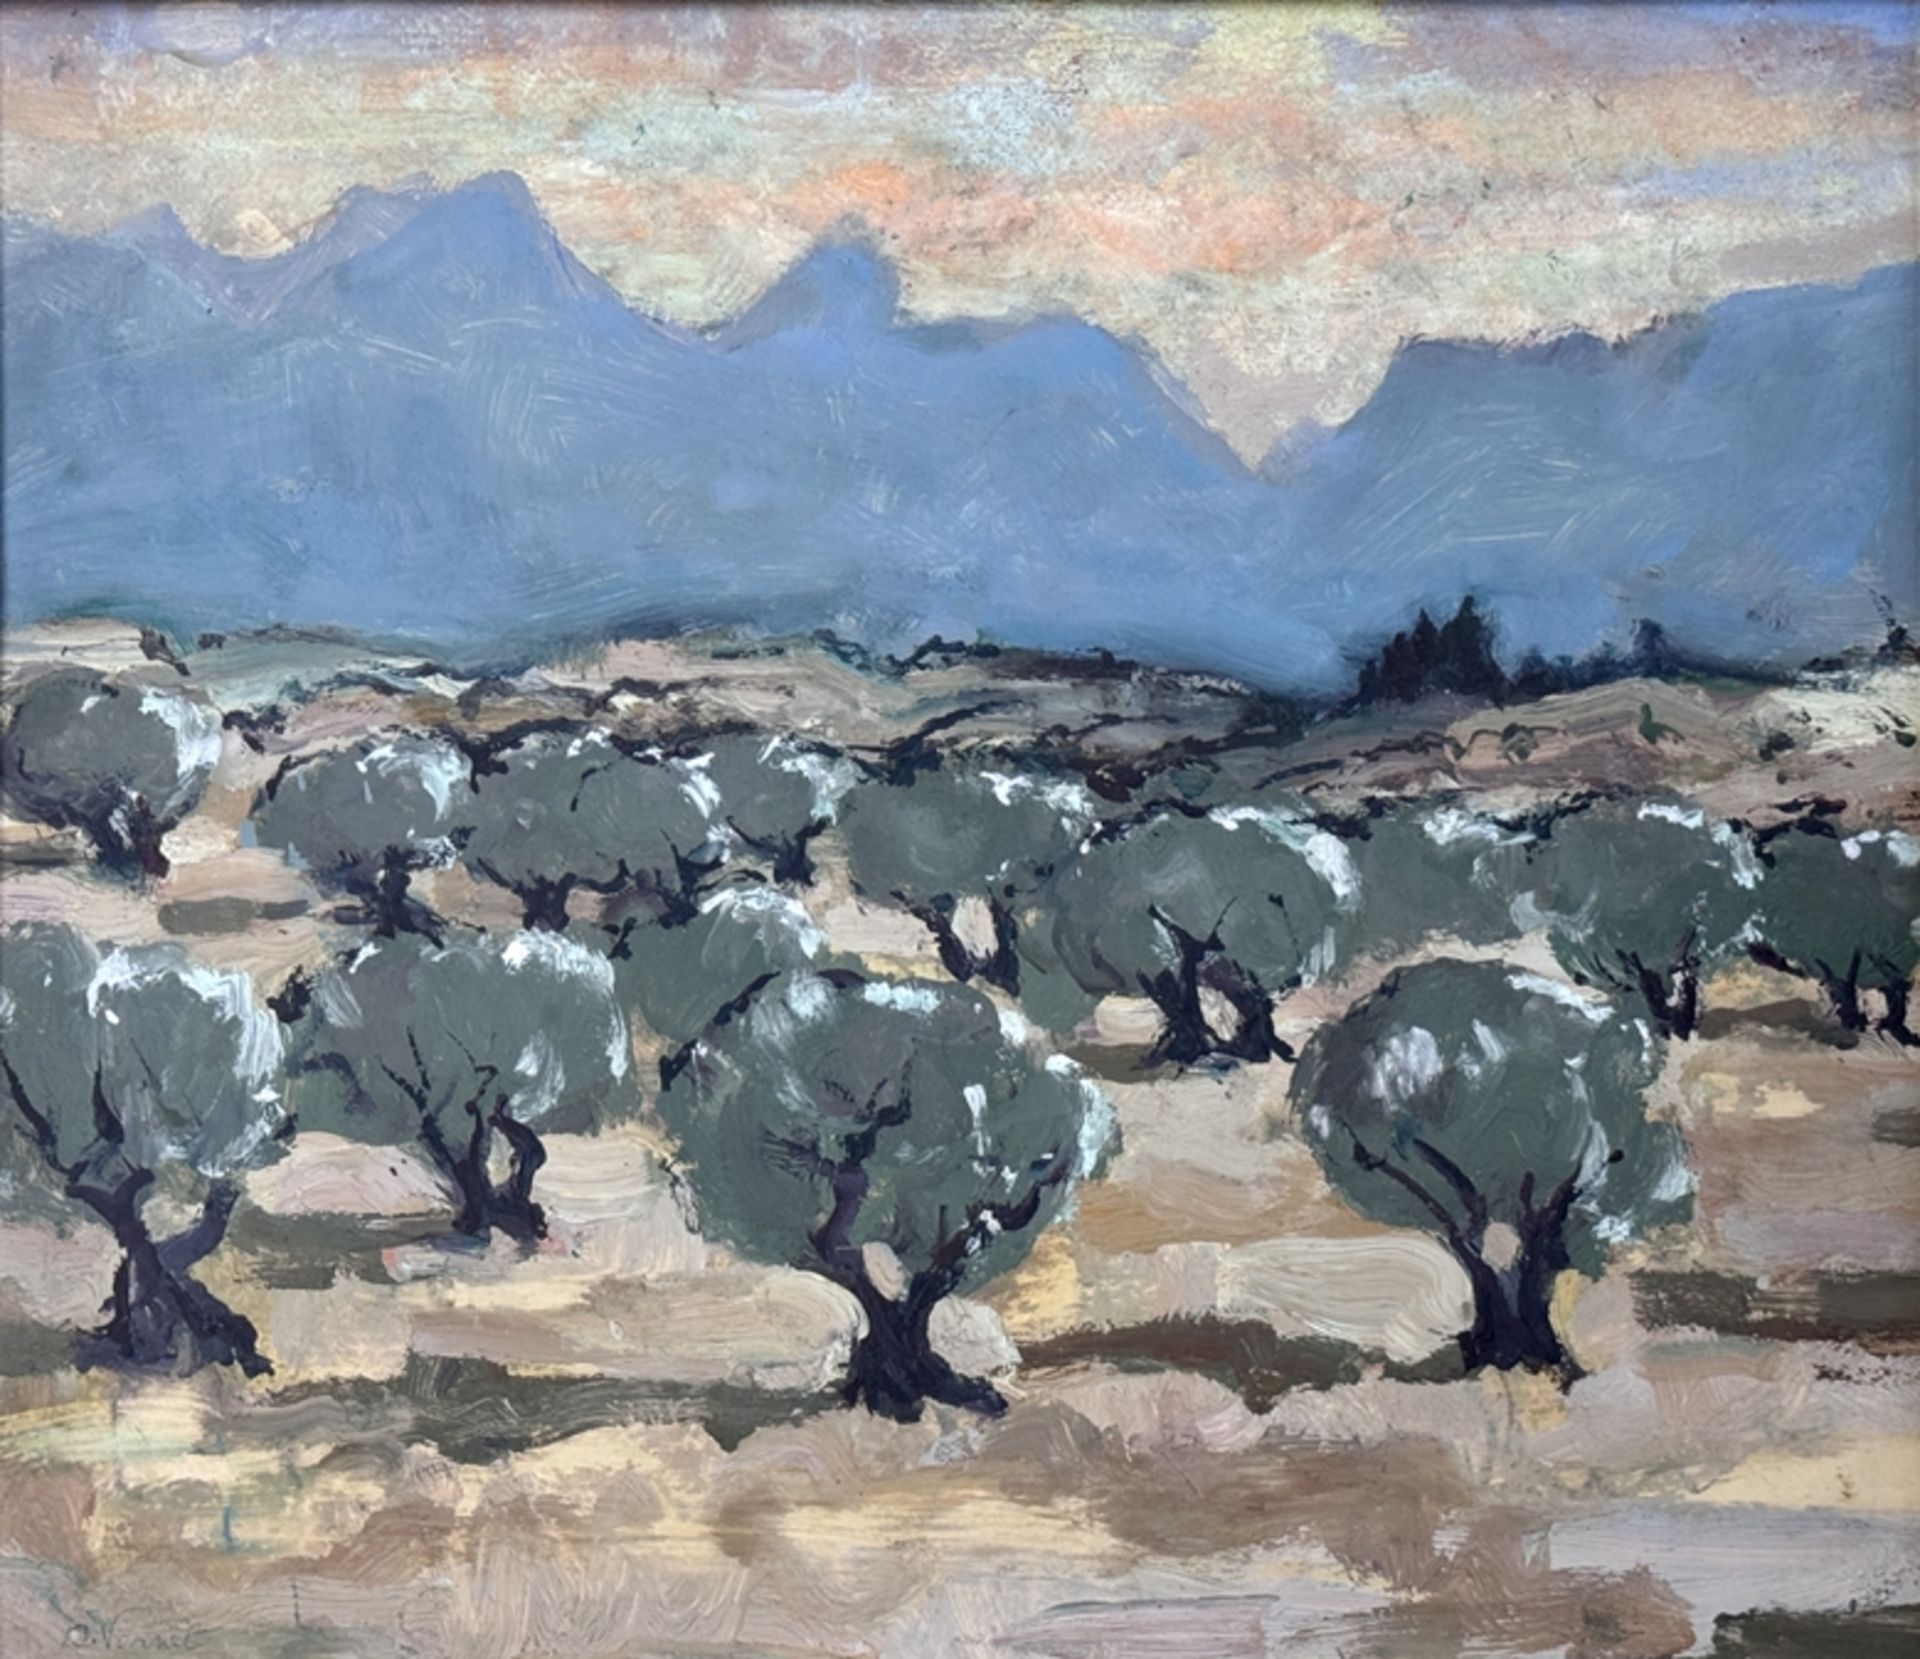 Artist (20th century) "Landscape view", in the foreground trees, in the background mountain view, o